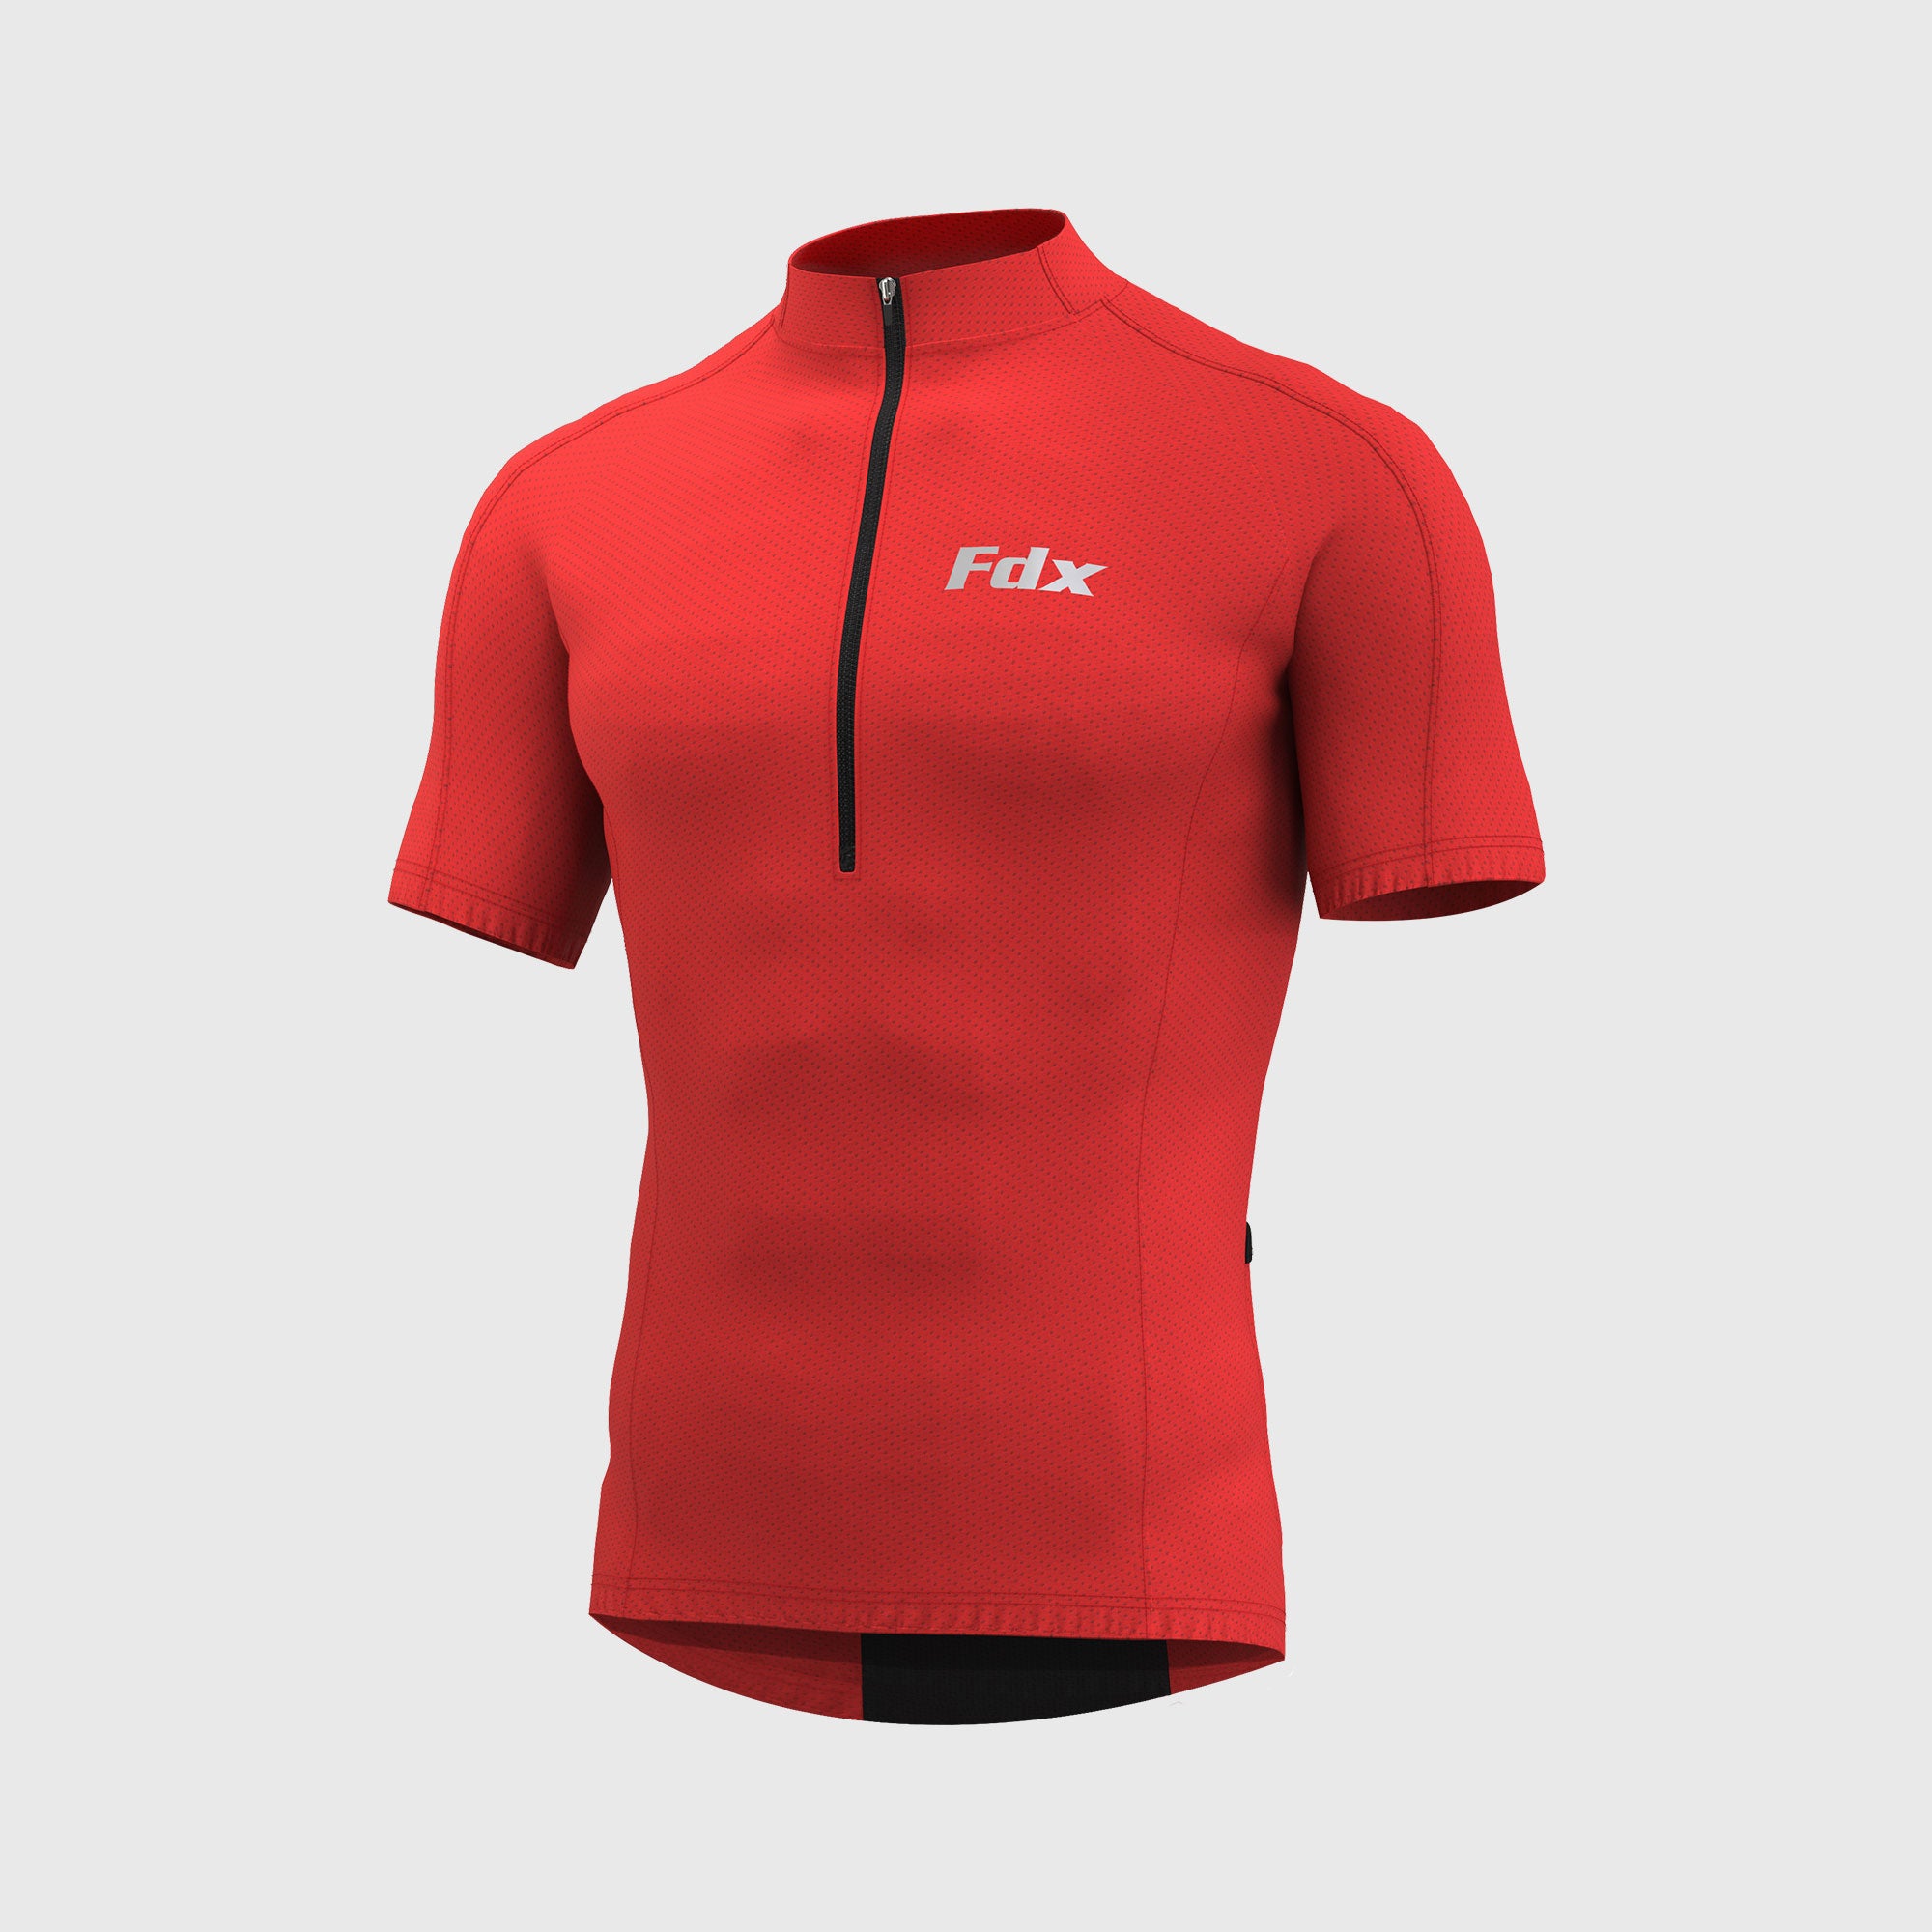  Fdx Red best short sleeves men’s cycling jersey breathable lightweight hi-viz Reflective details summer biking top, full zip skin friendly half sleeves mesh cycling shirt for indoor & outdoor riding with two back & 1 zip pockets